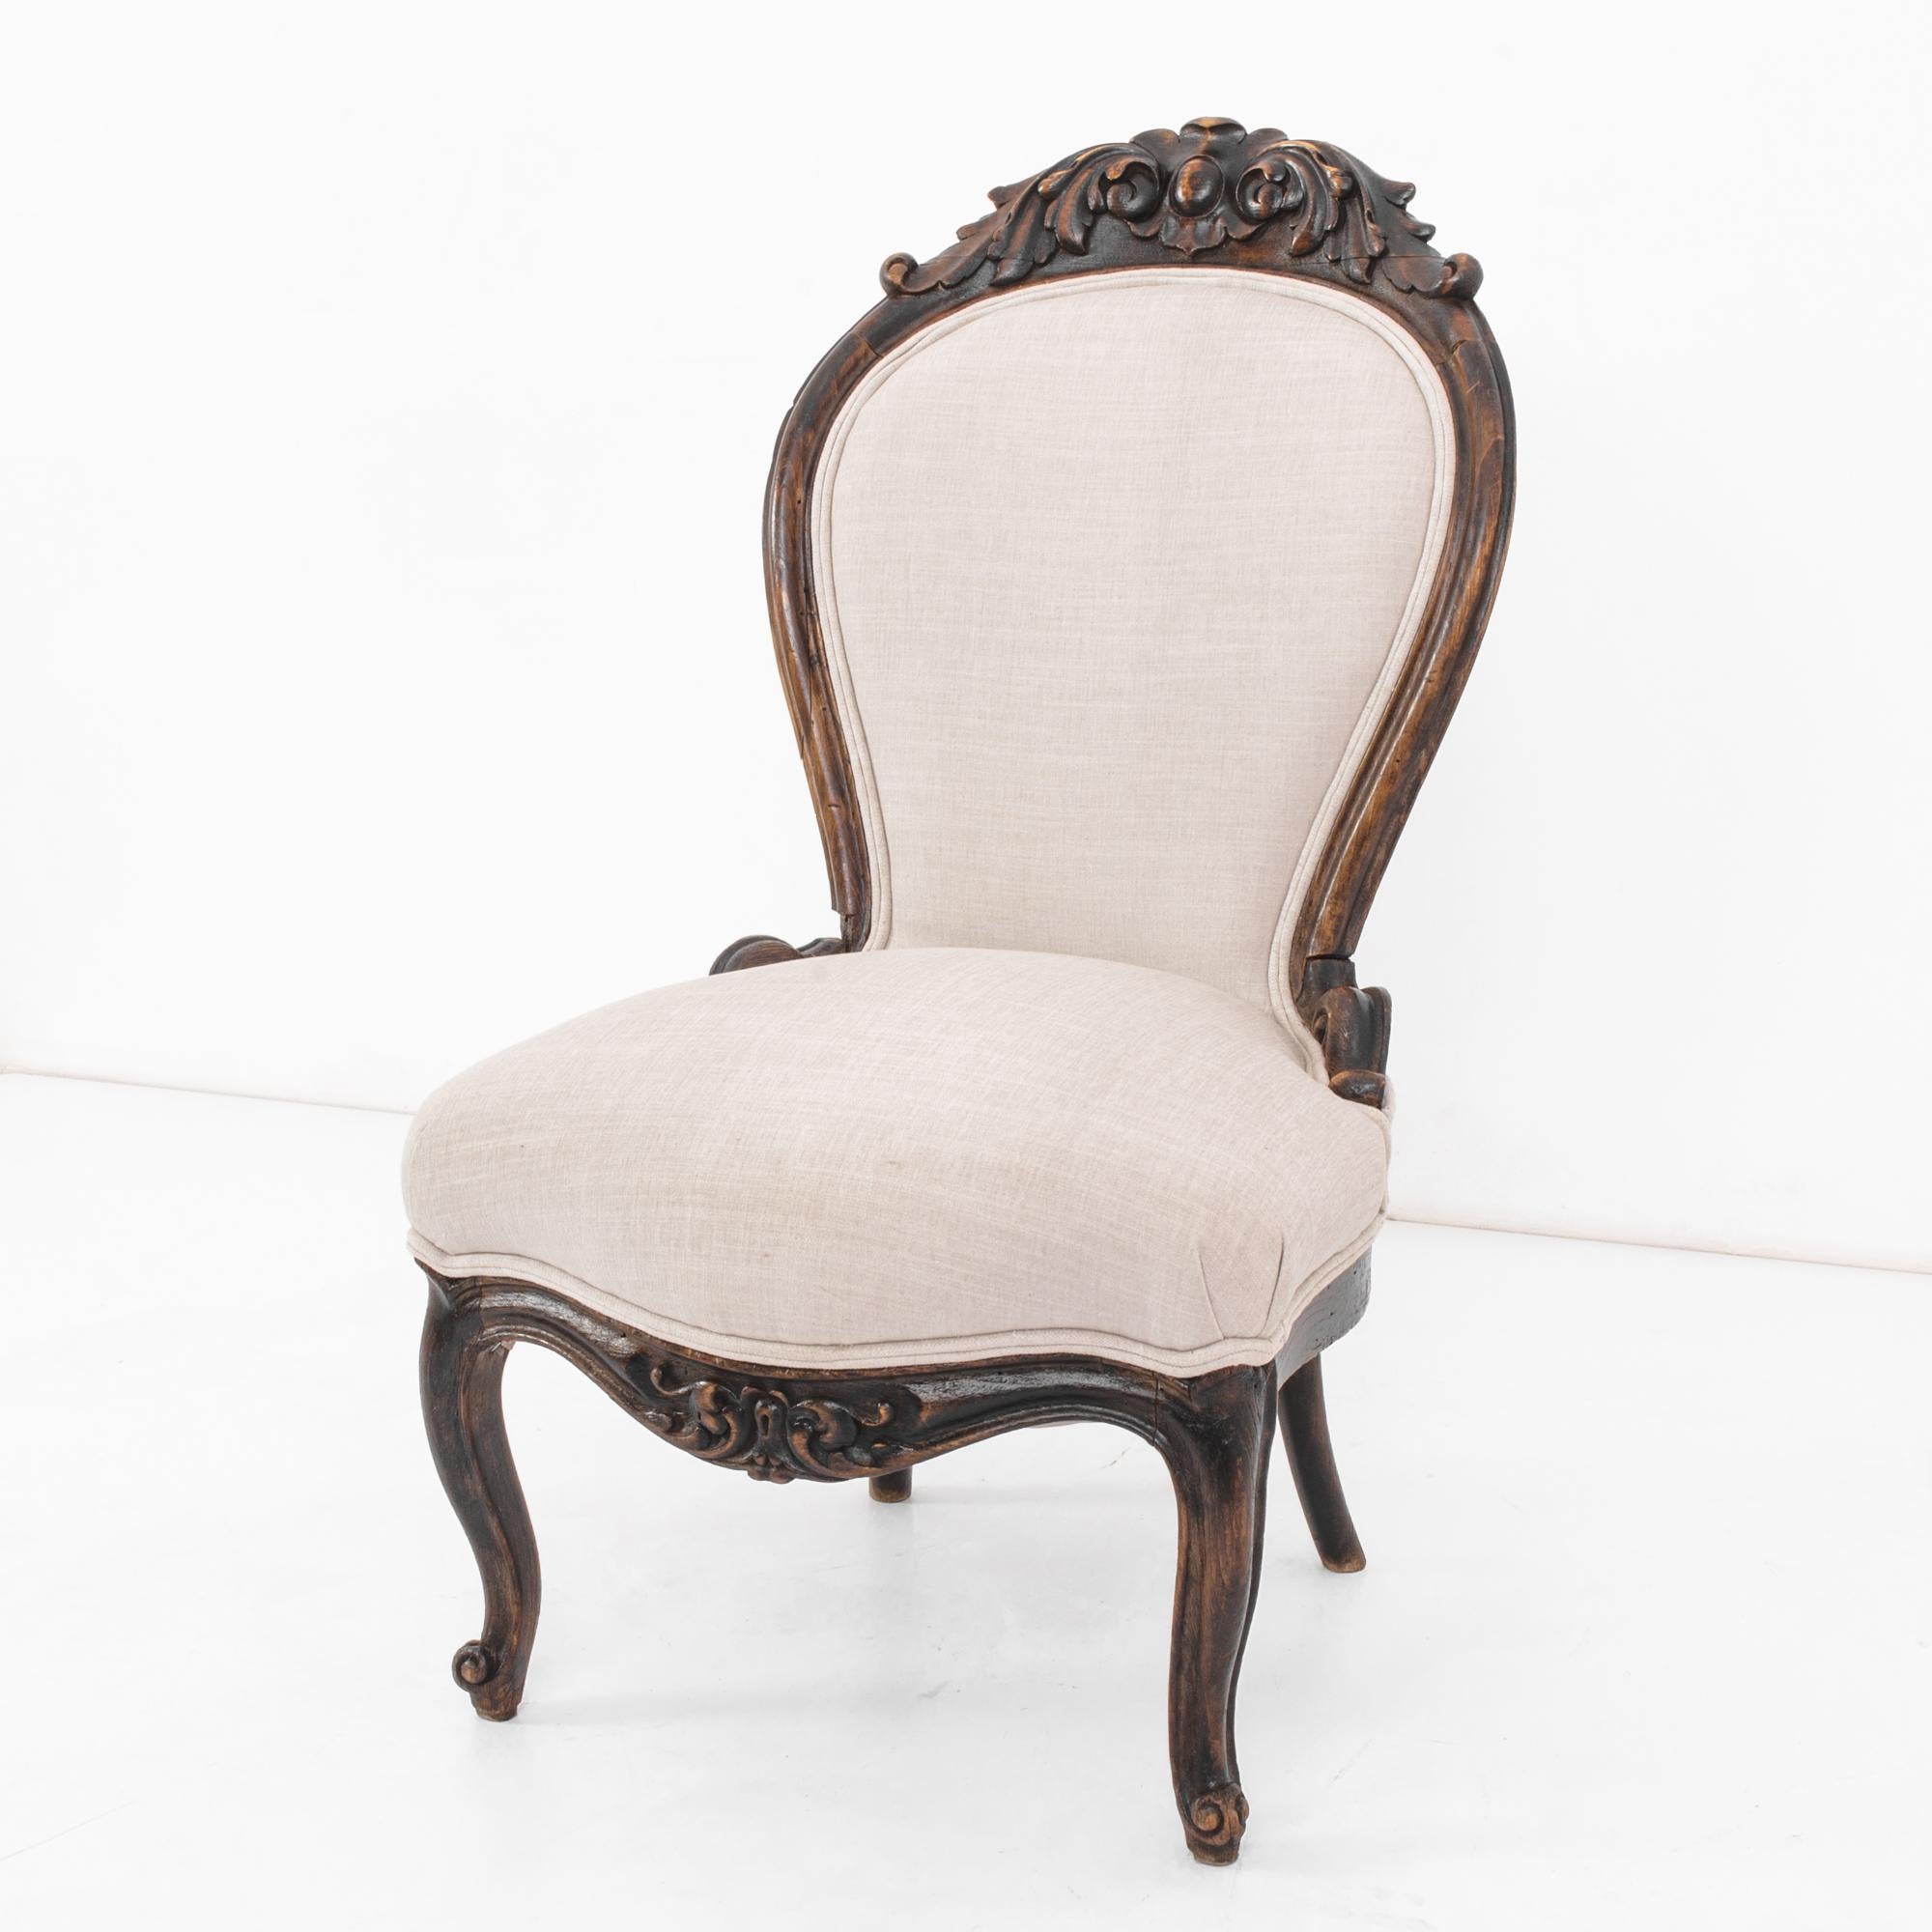 Indulge in the timeless elegance of this 1880s French Wooden Chair. Crafted with exquisite artistry, the dark-finished wood showcases intricate carvings that adorn the beautiful apron and top carved piece. The upholstered seat and back, in a crisp